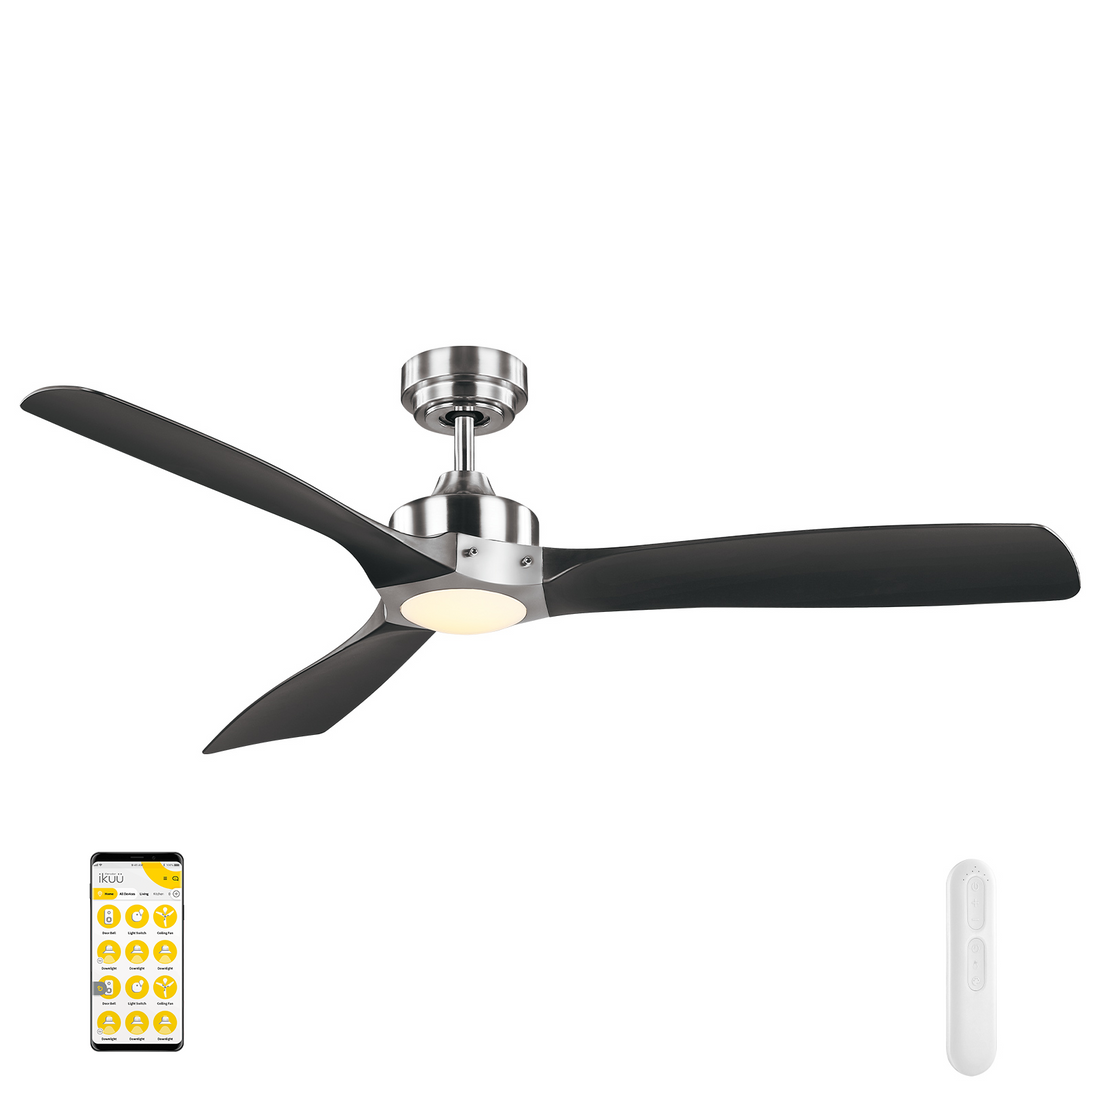 Minota DC Ikuü Smart Wi-Fi Ceiling Fans with LED Light and Remote Mercator